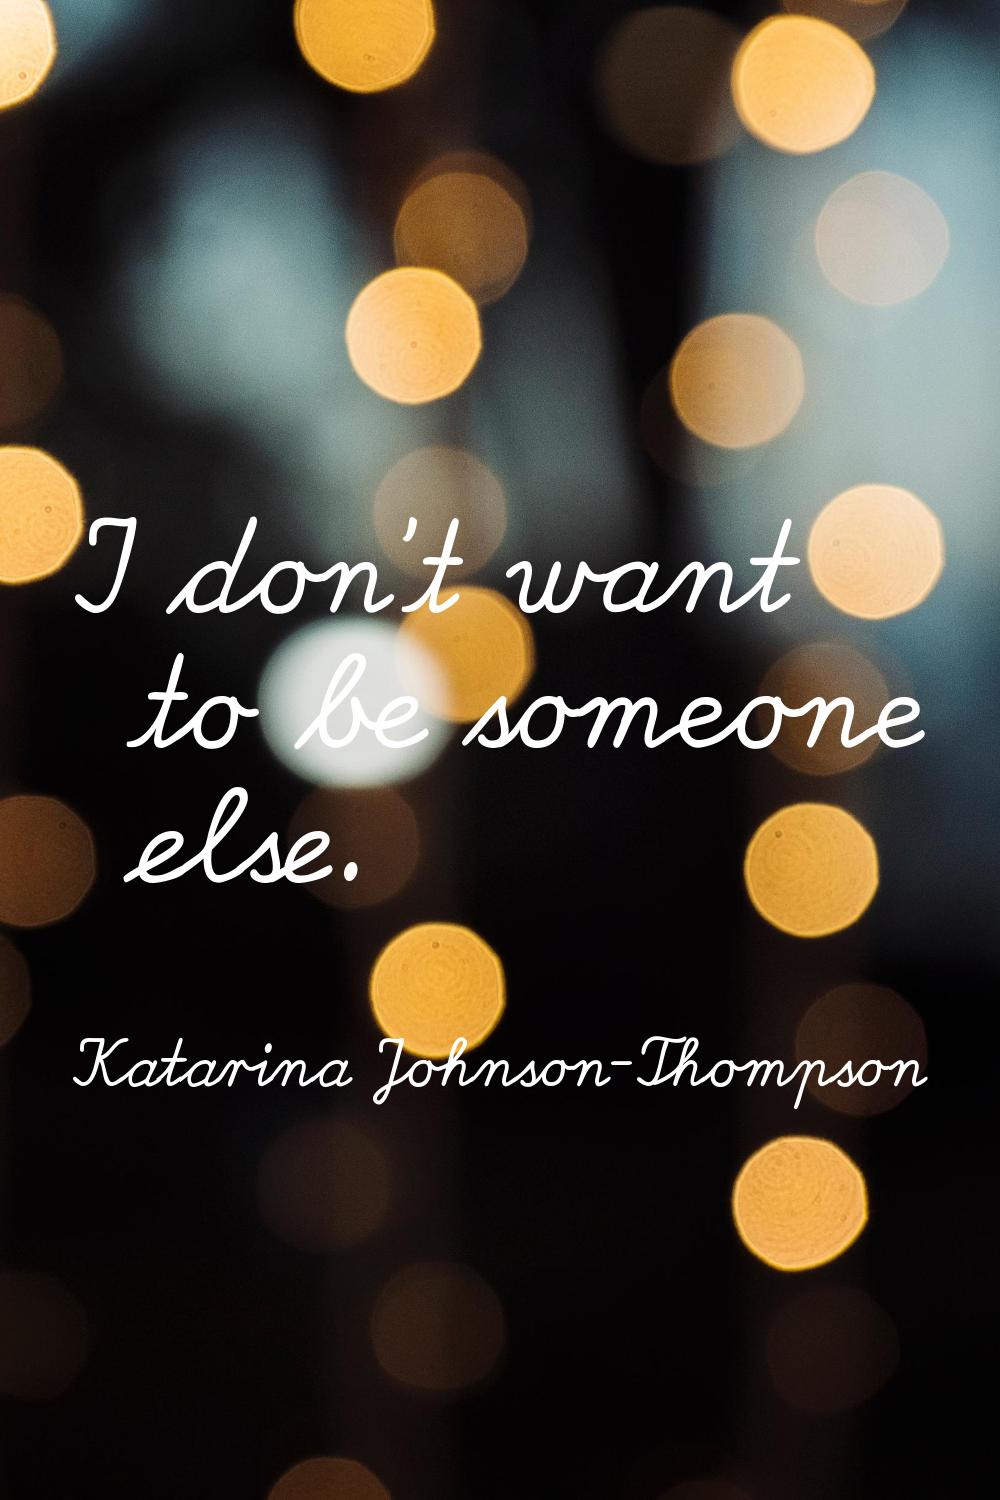 I don't want to be someone else.